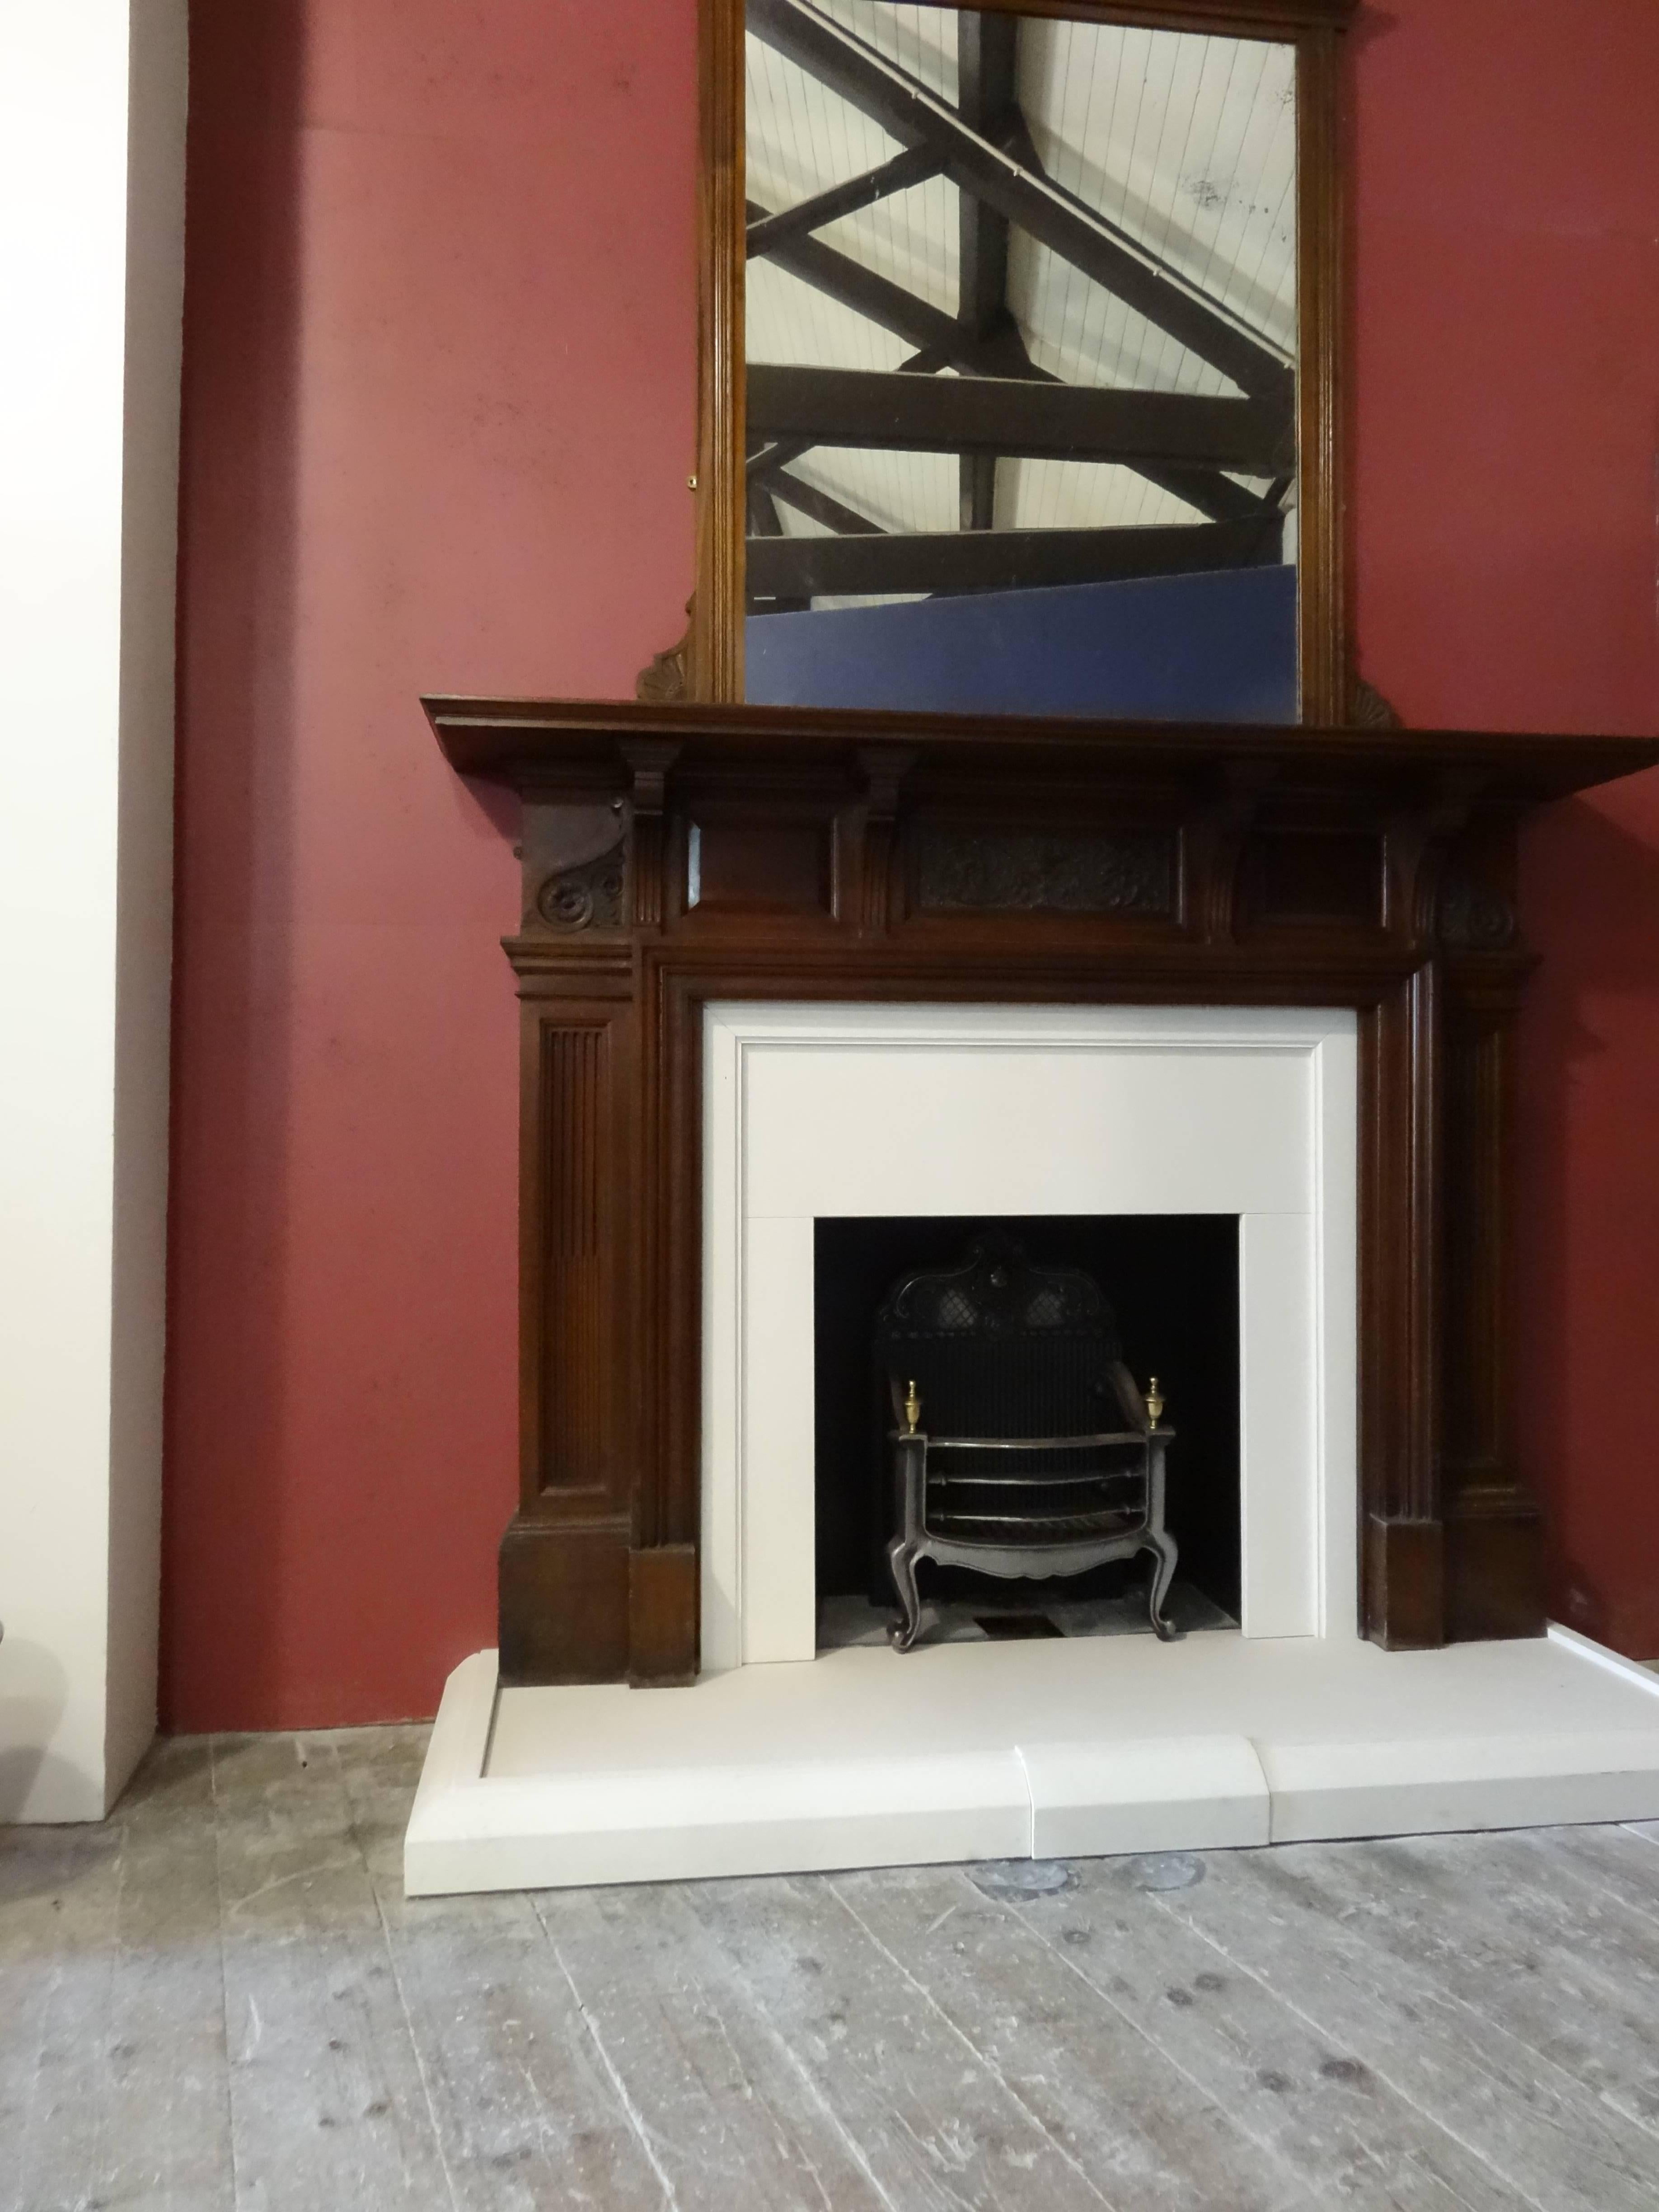 Reclaimed 20th century Edwardian hand-carved walnut fireplace surround with overmantel mirror. In original reclaimed condition.

External measurements:
Overall width 73 inches / 185 cm
Overall height 114 inches / 289 cm
Mantel depth 12.5 inches